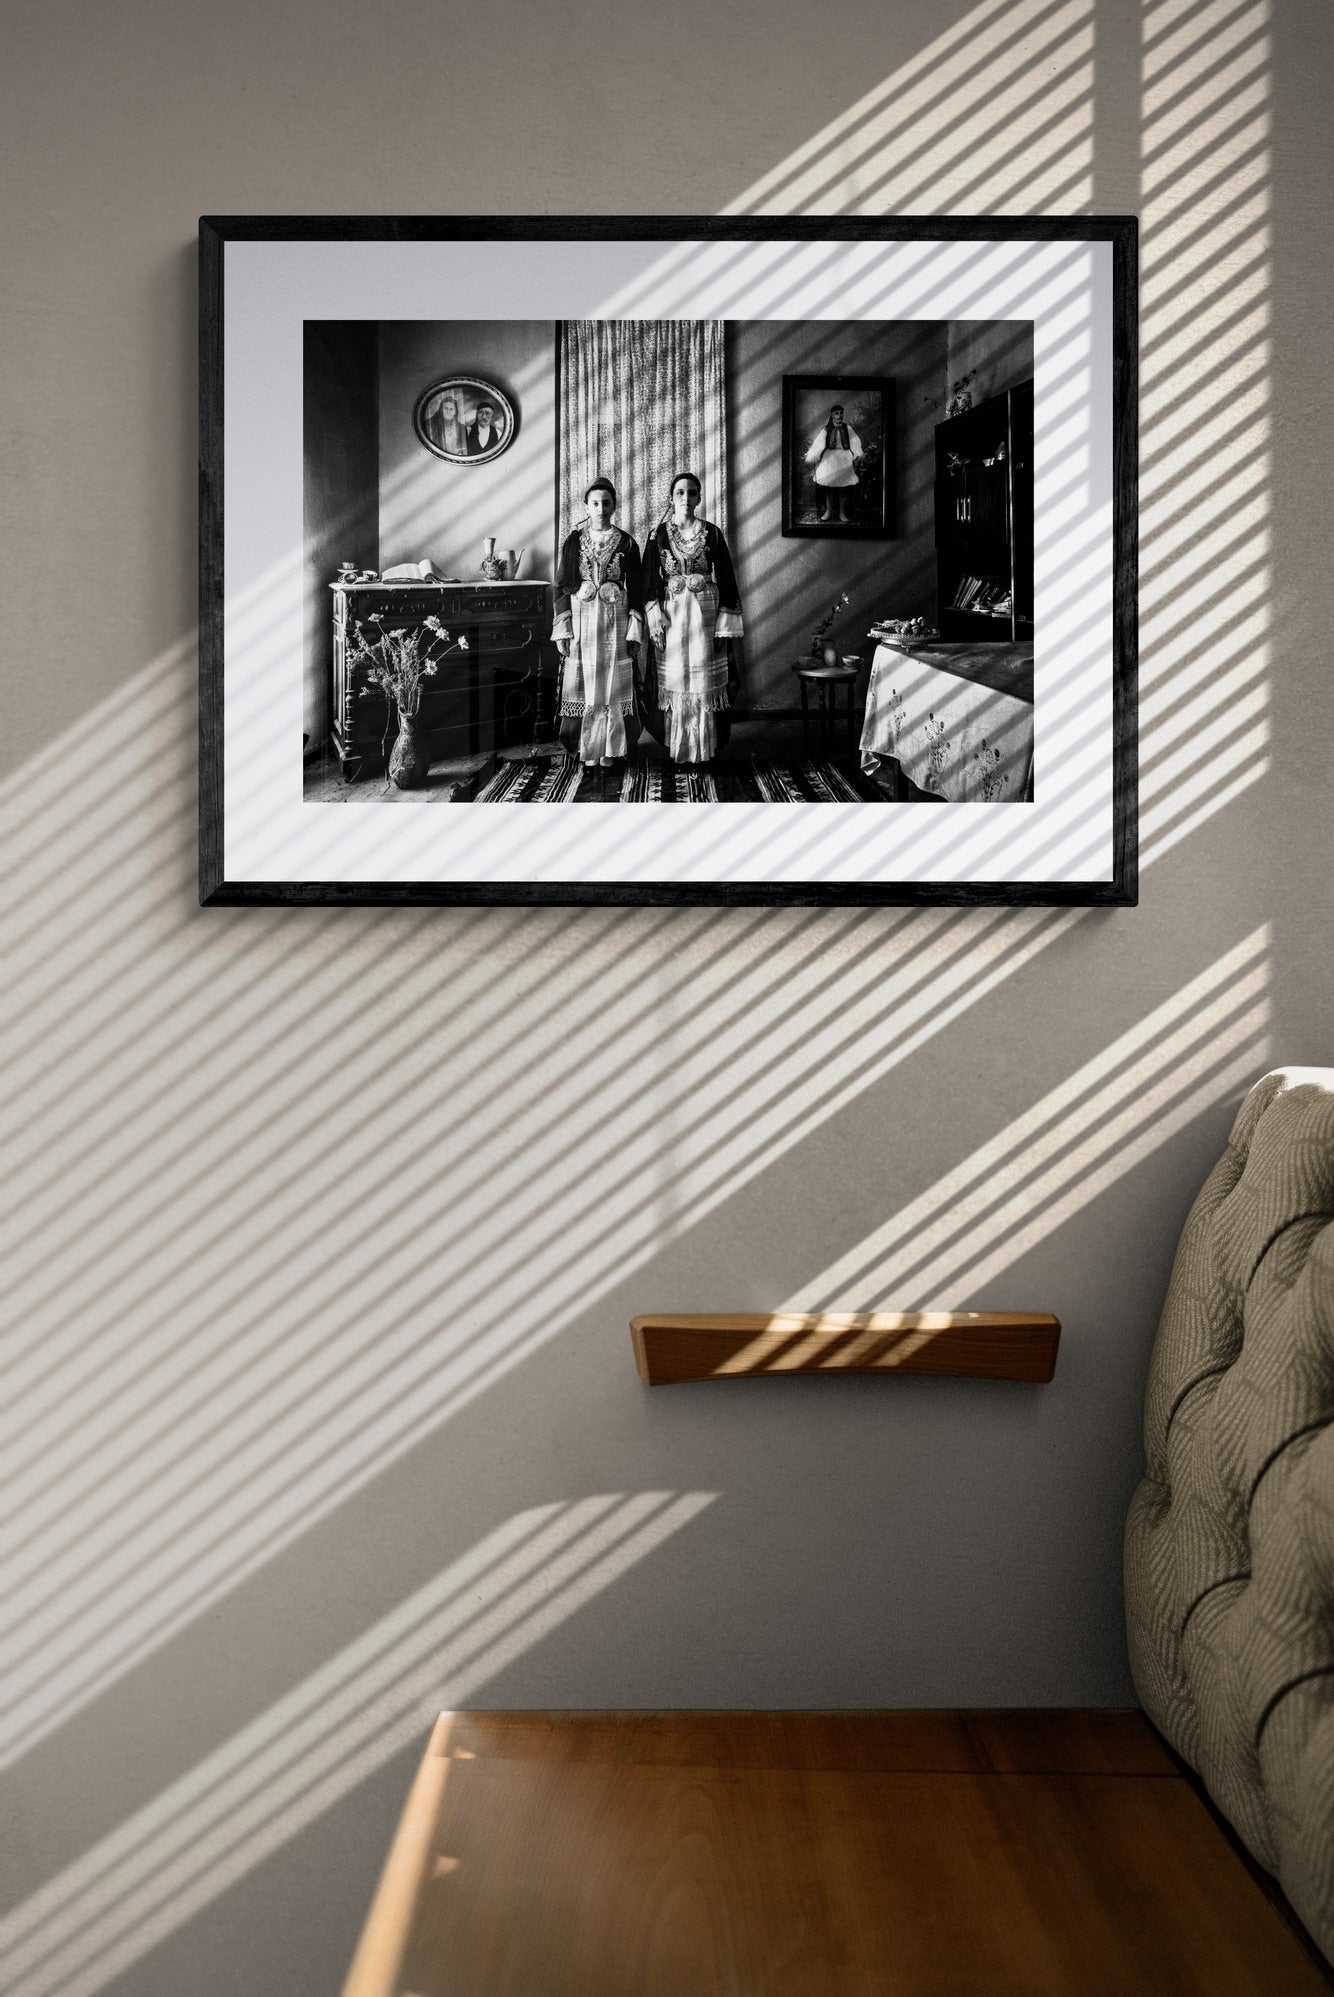 Black and White Photography Wall Art Greece | Costumes of Tegea in a traditional home Arcadia Peloponnese by George Tatakis - single framed photo